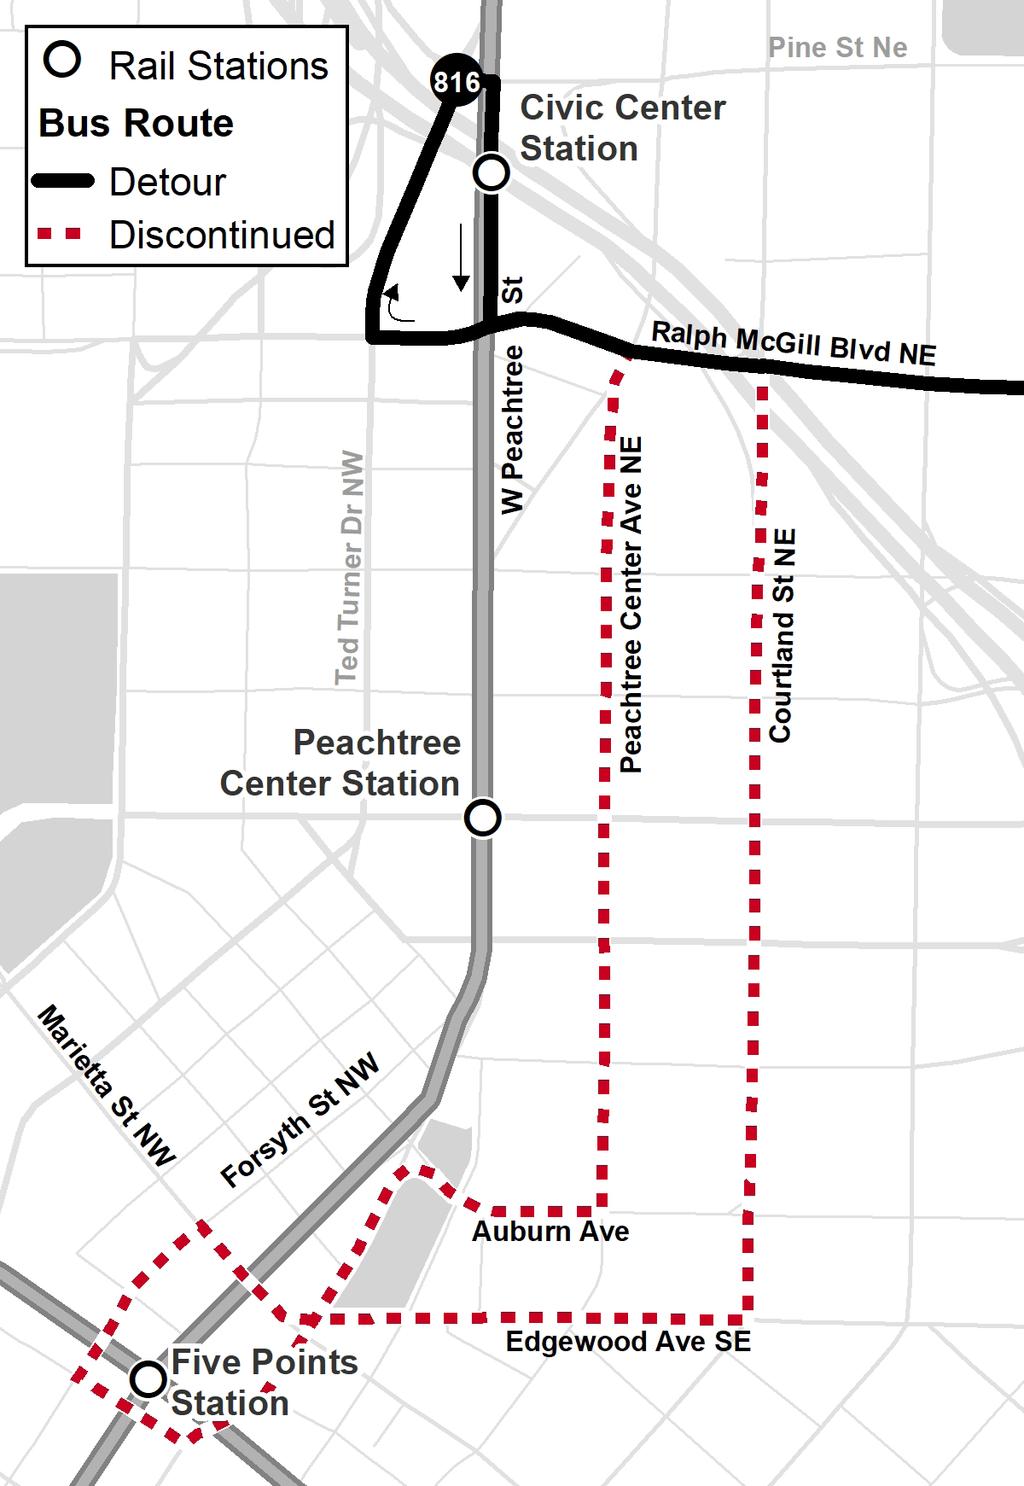 In addition to a temporary stop, passengers may board at regular posted stops on Ralph McGill Blvd.